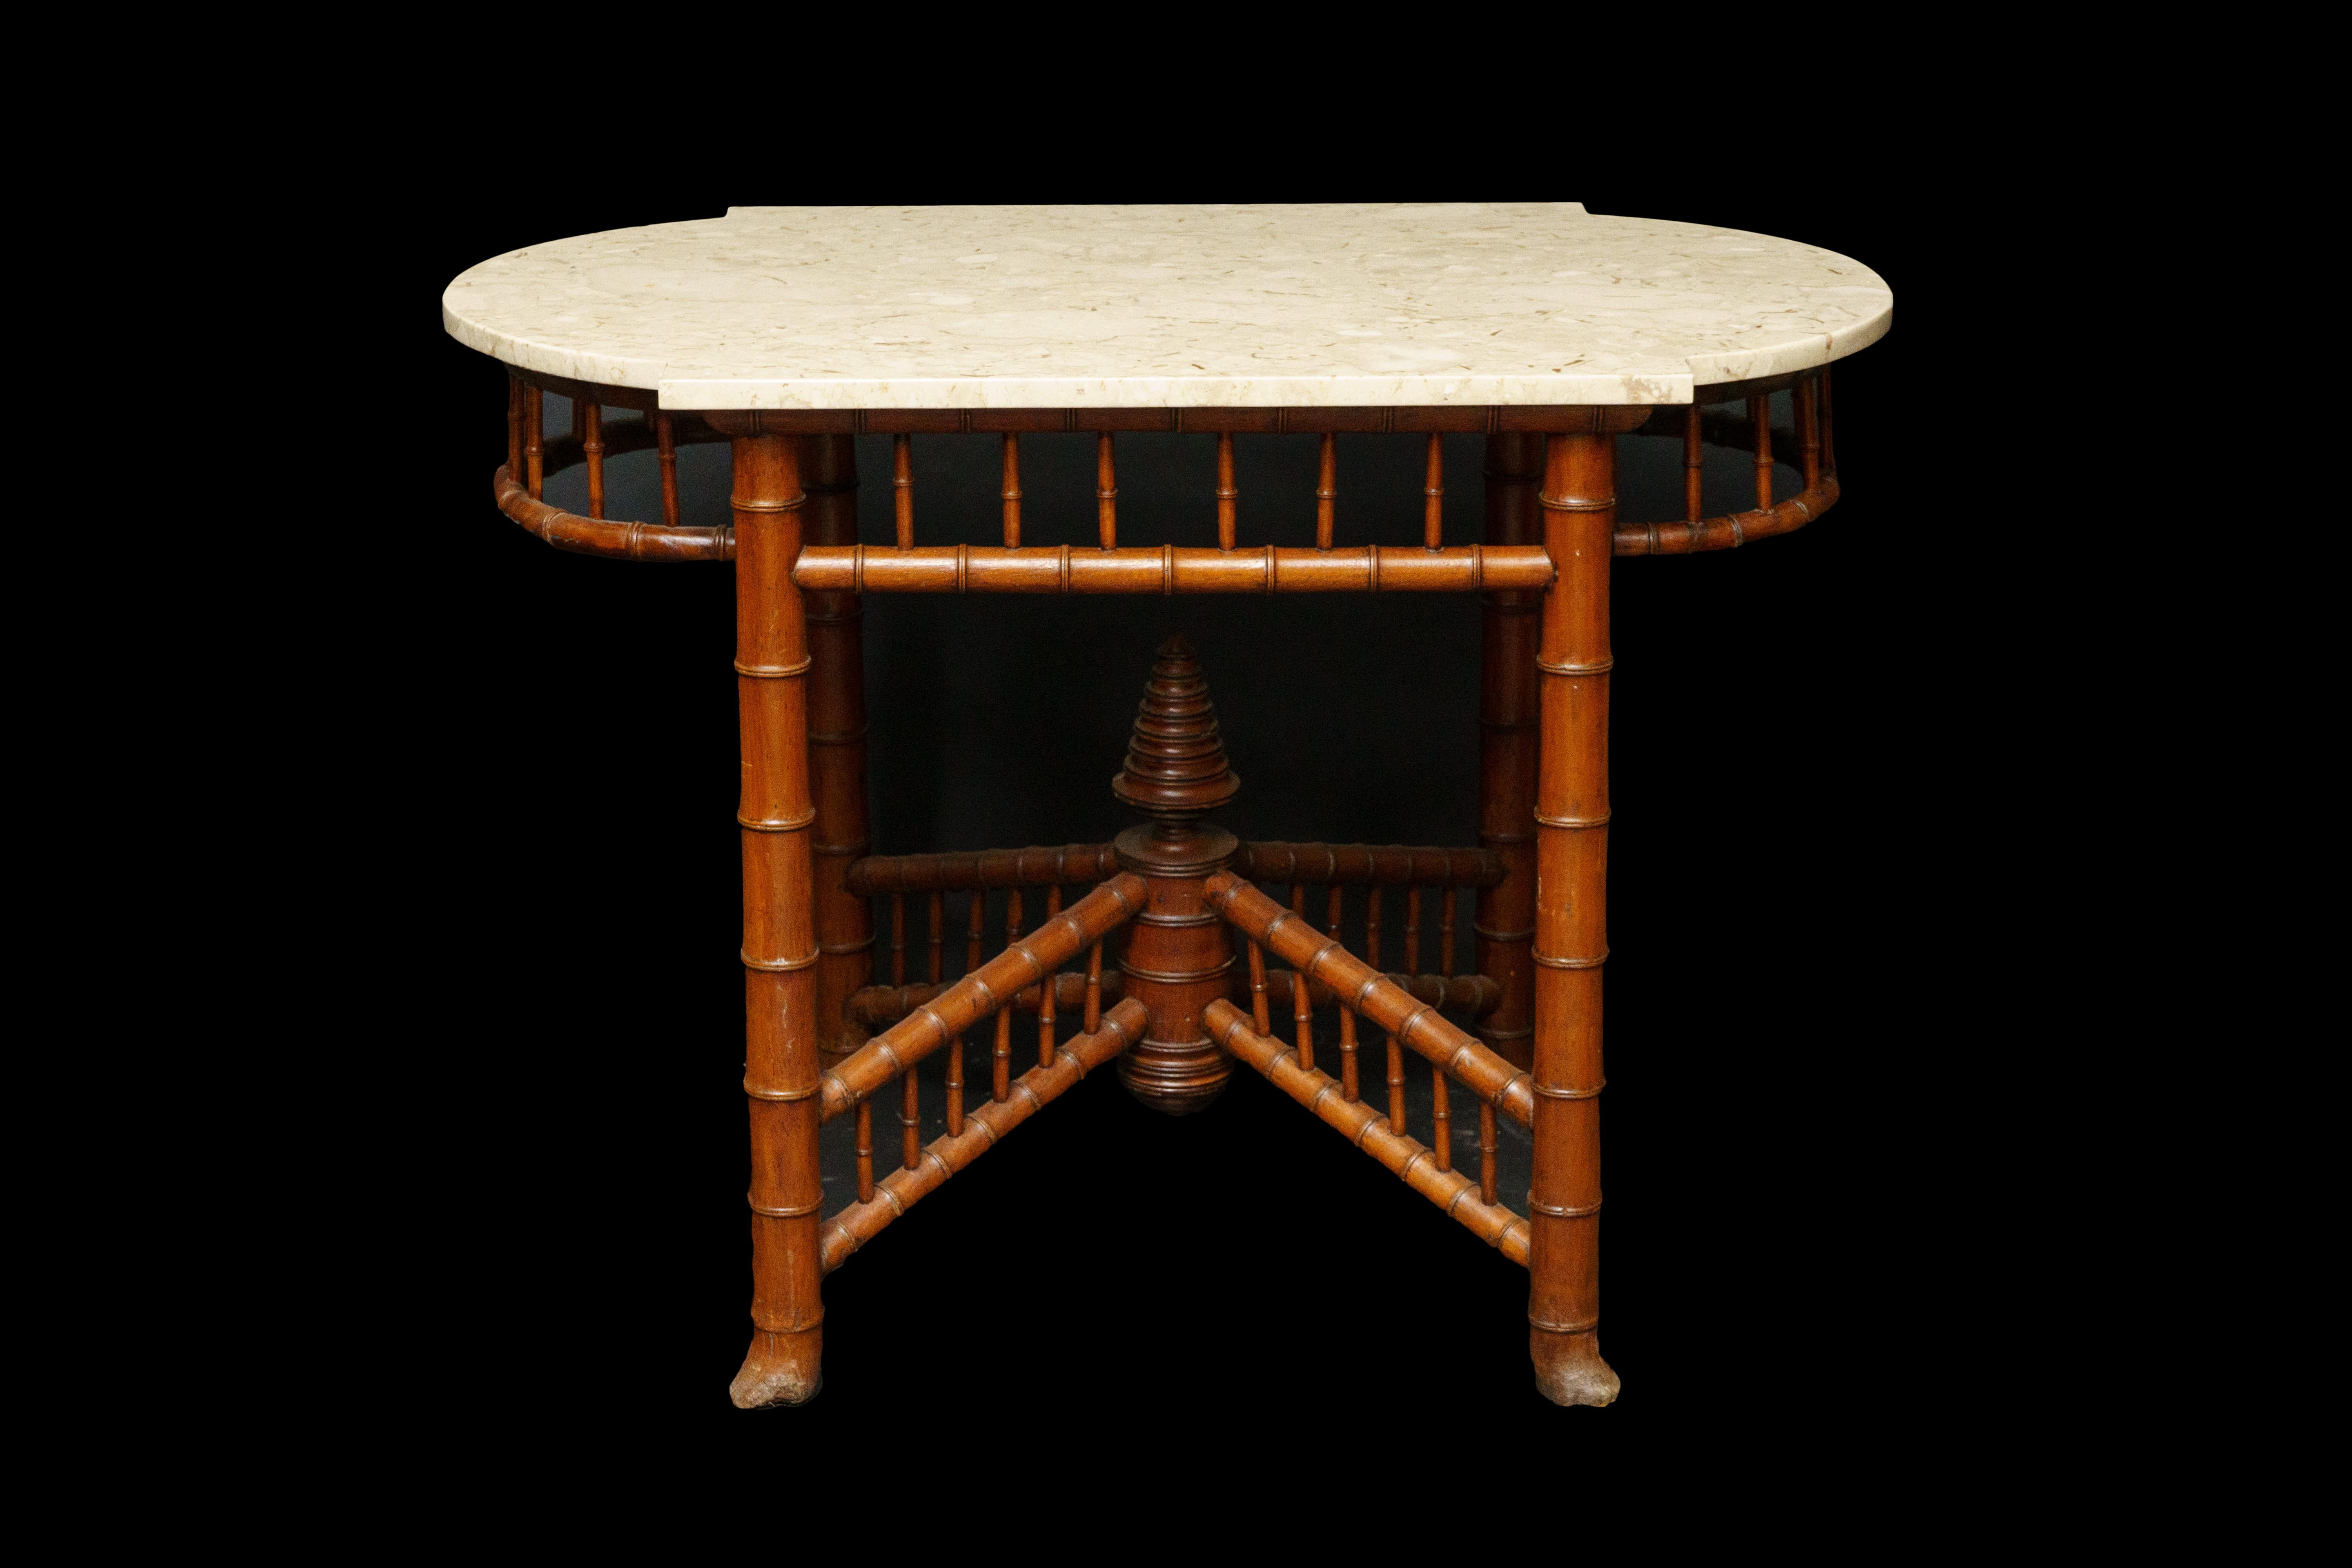 Faux bamboo & marble top center table from the late 19th century:

Measures: 39